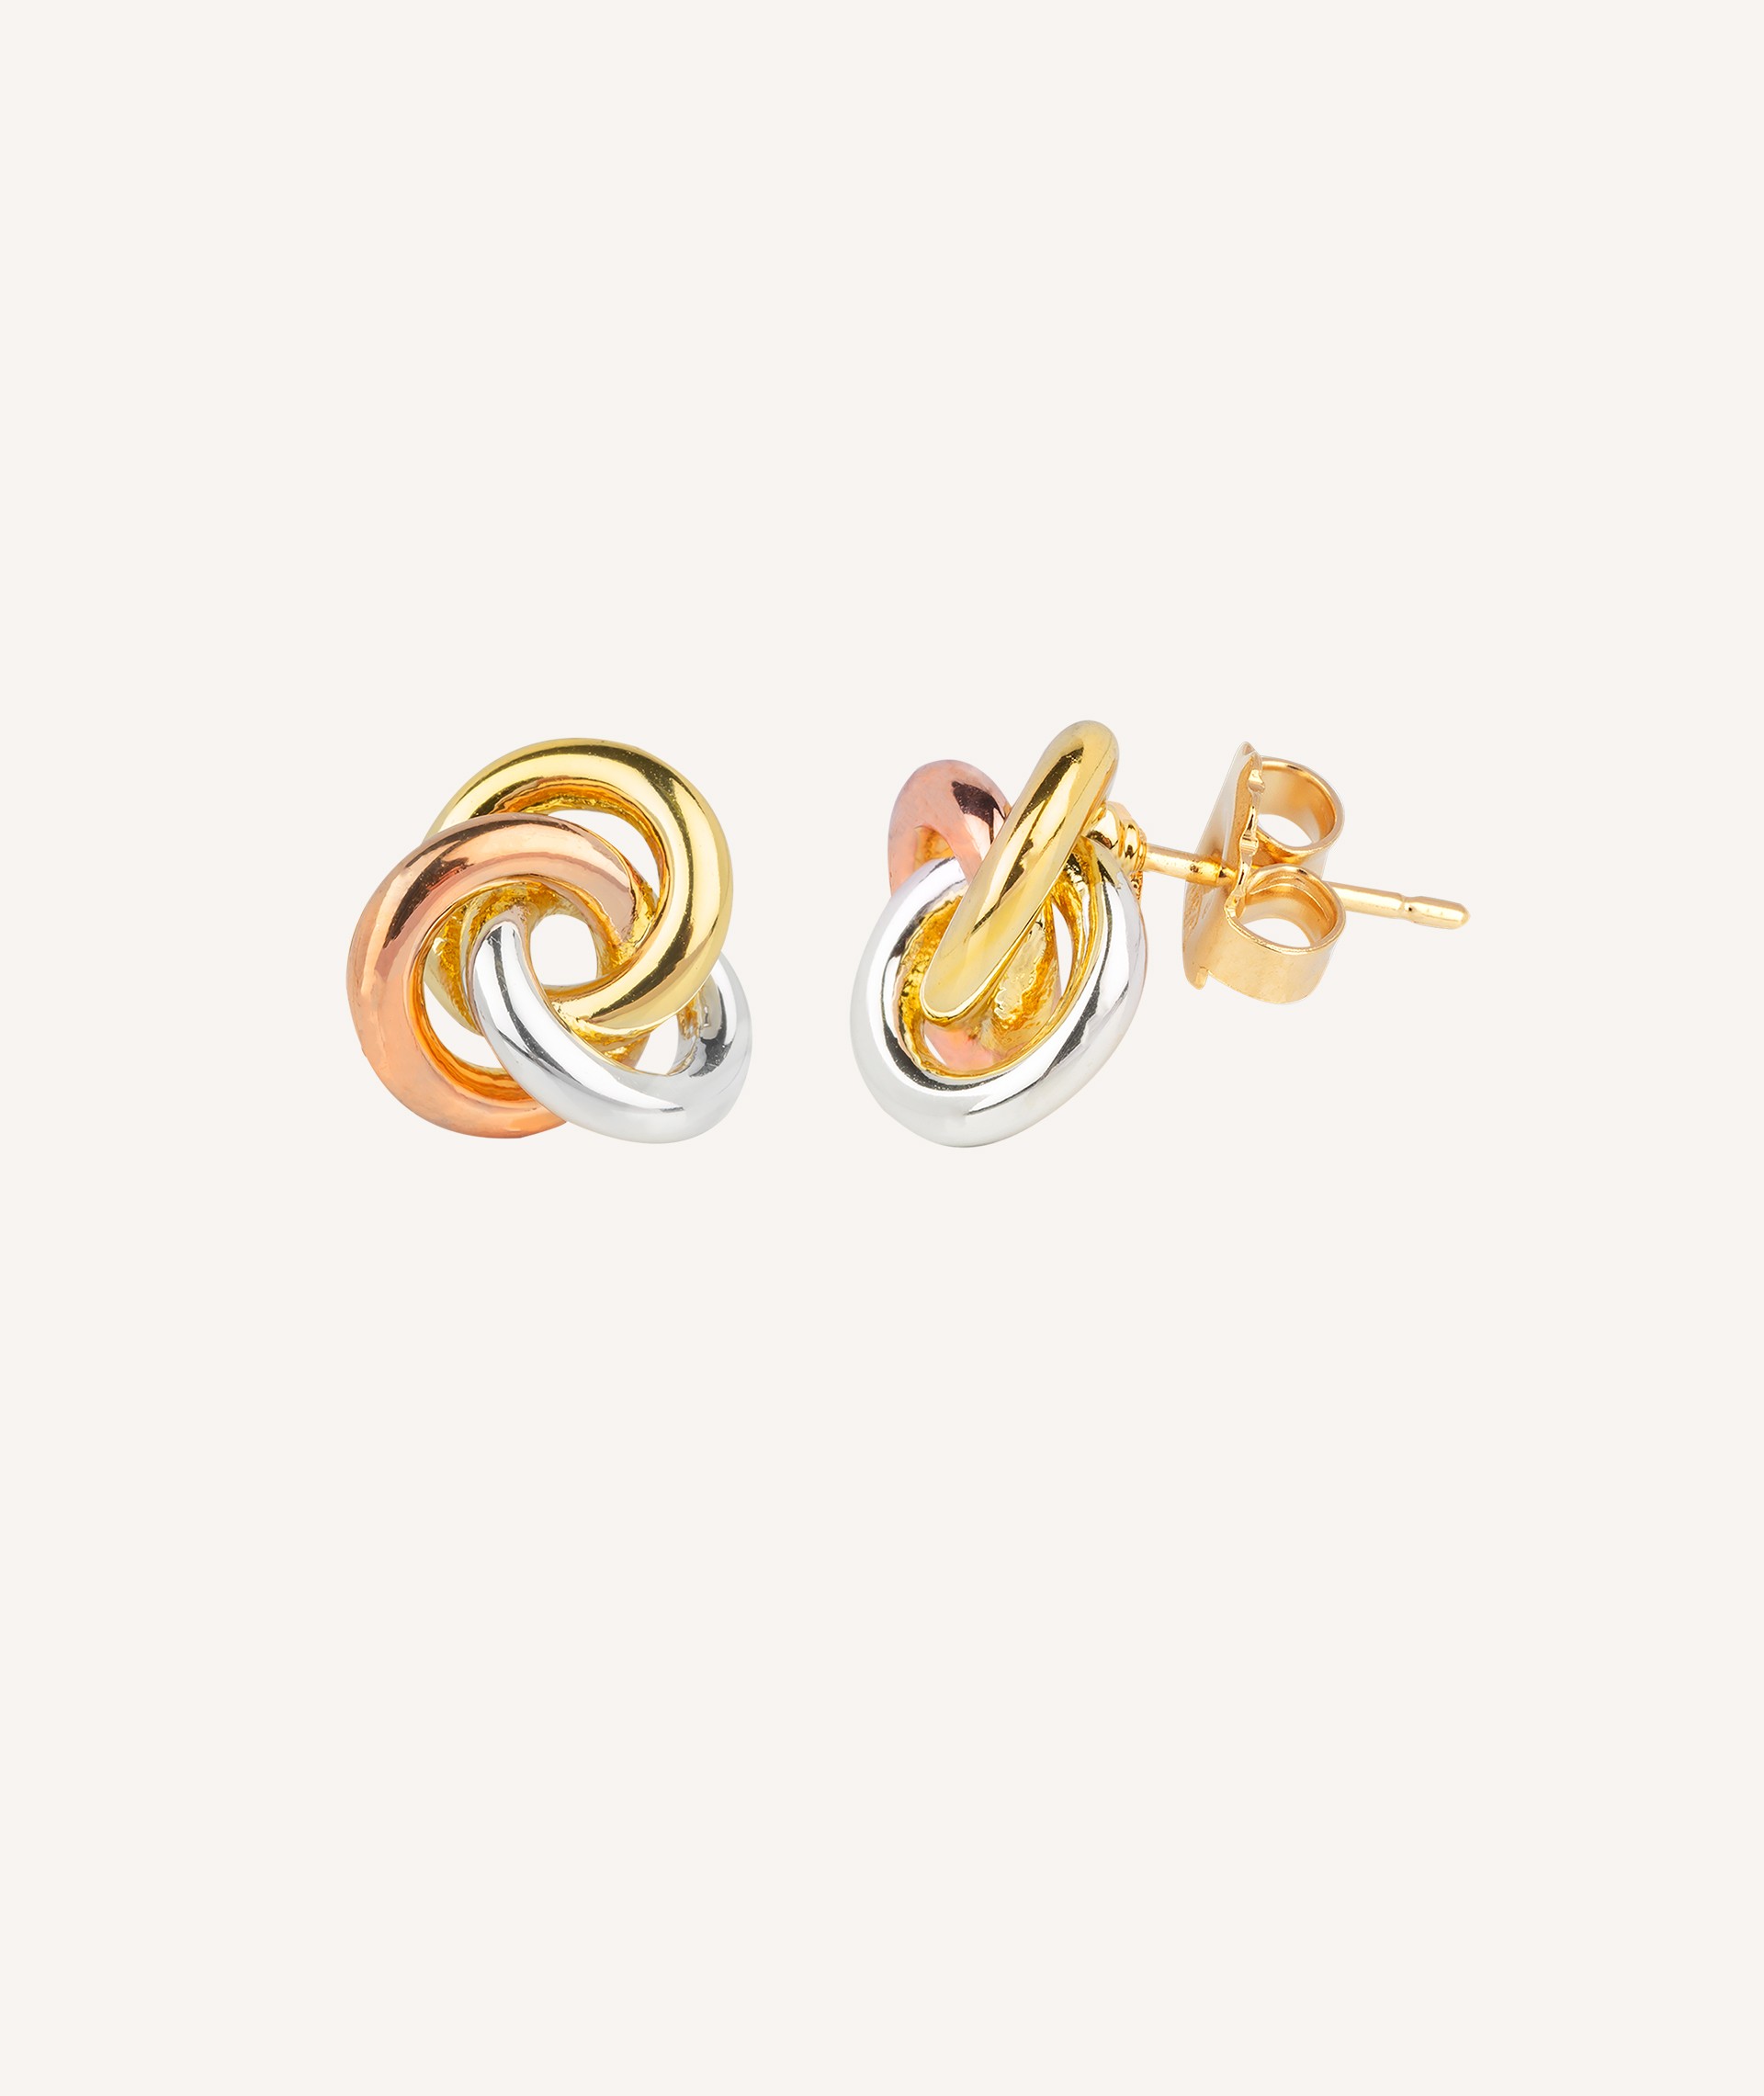 Rounded Knot Earrings Tricolor